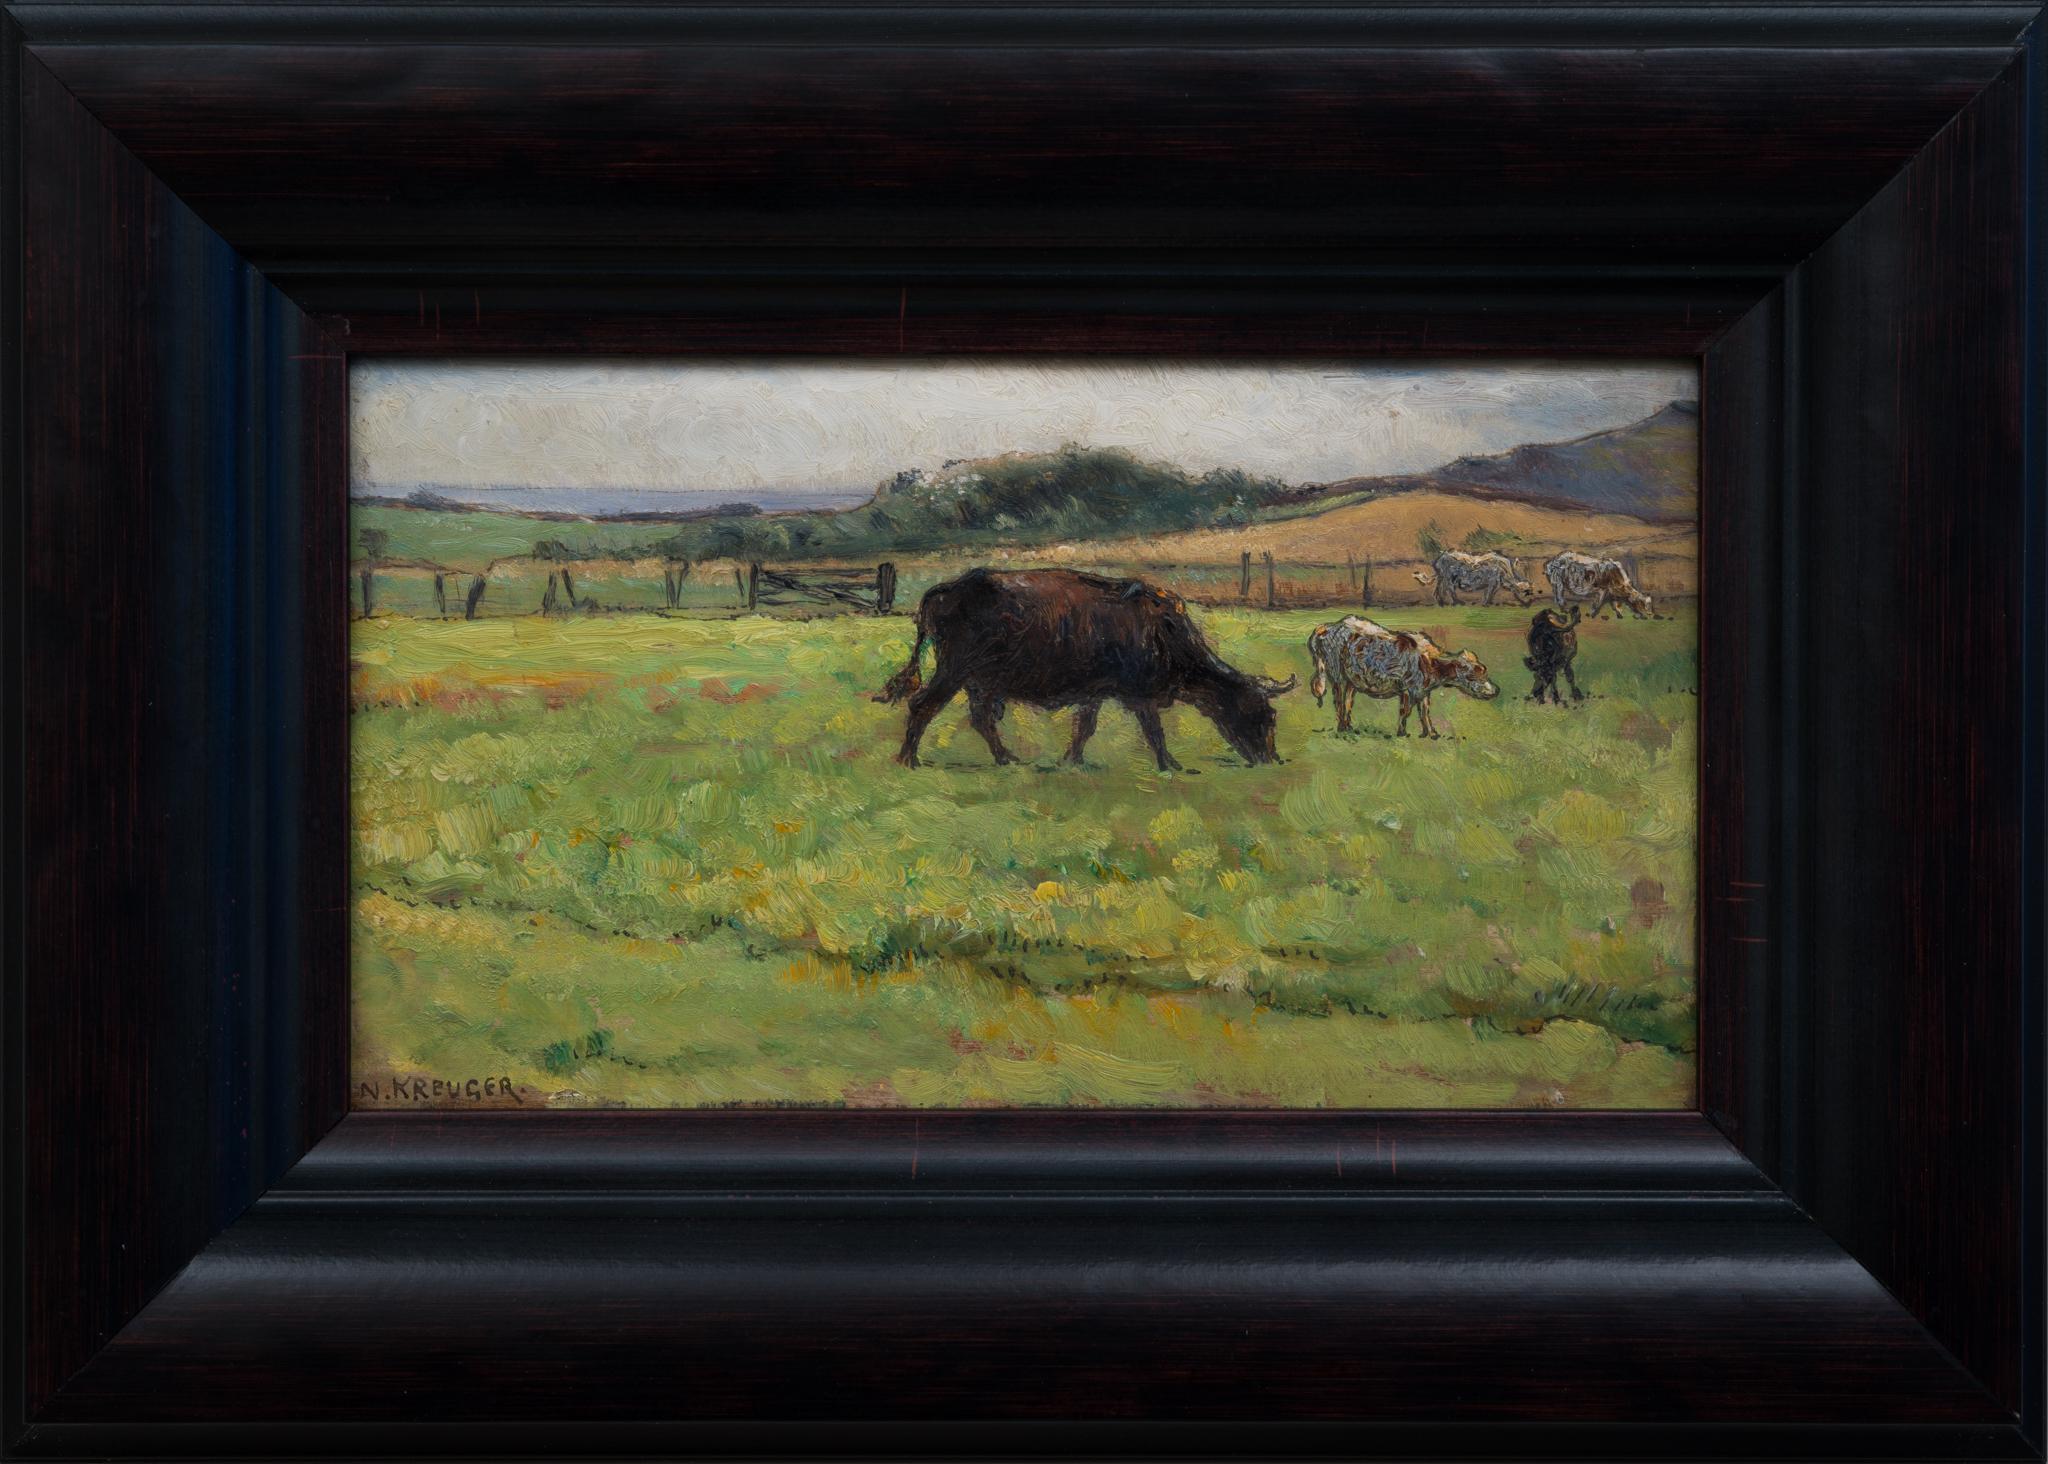 This exquisite oil painting on panel, measuring 13.5 x 24.5 cm, is a beautiful piece by Nils Kreuger, a distinguished Swedish painter. The artwork depicts five cattle grazing on a green meadow, a scene that encapsulates the tranquil beauty of rural